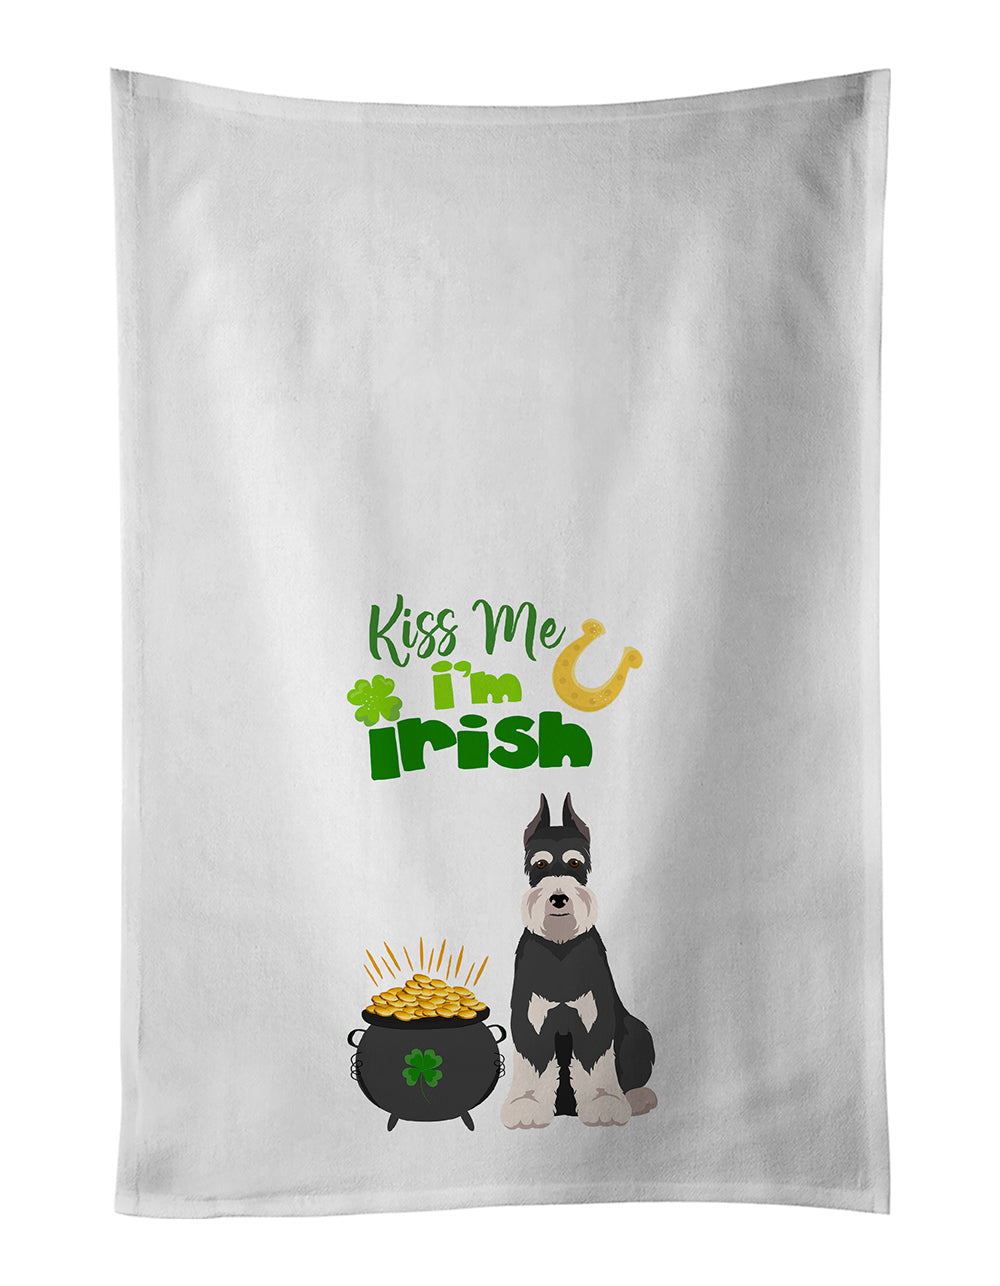 Buy this Black and Silver Schnauzer St. Patrick's Day White Kitchen Towel Set of 2 Dish Towels